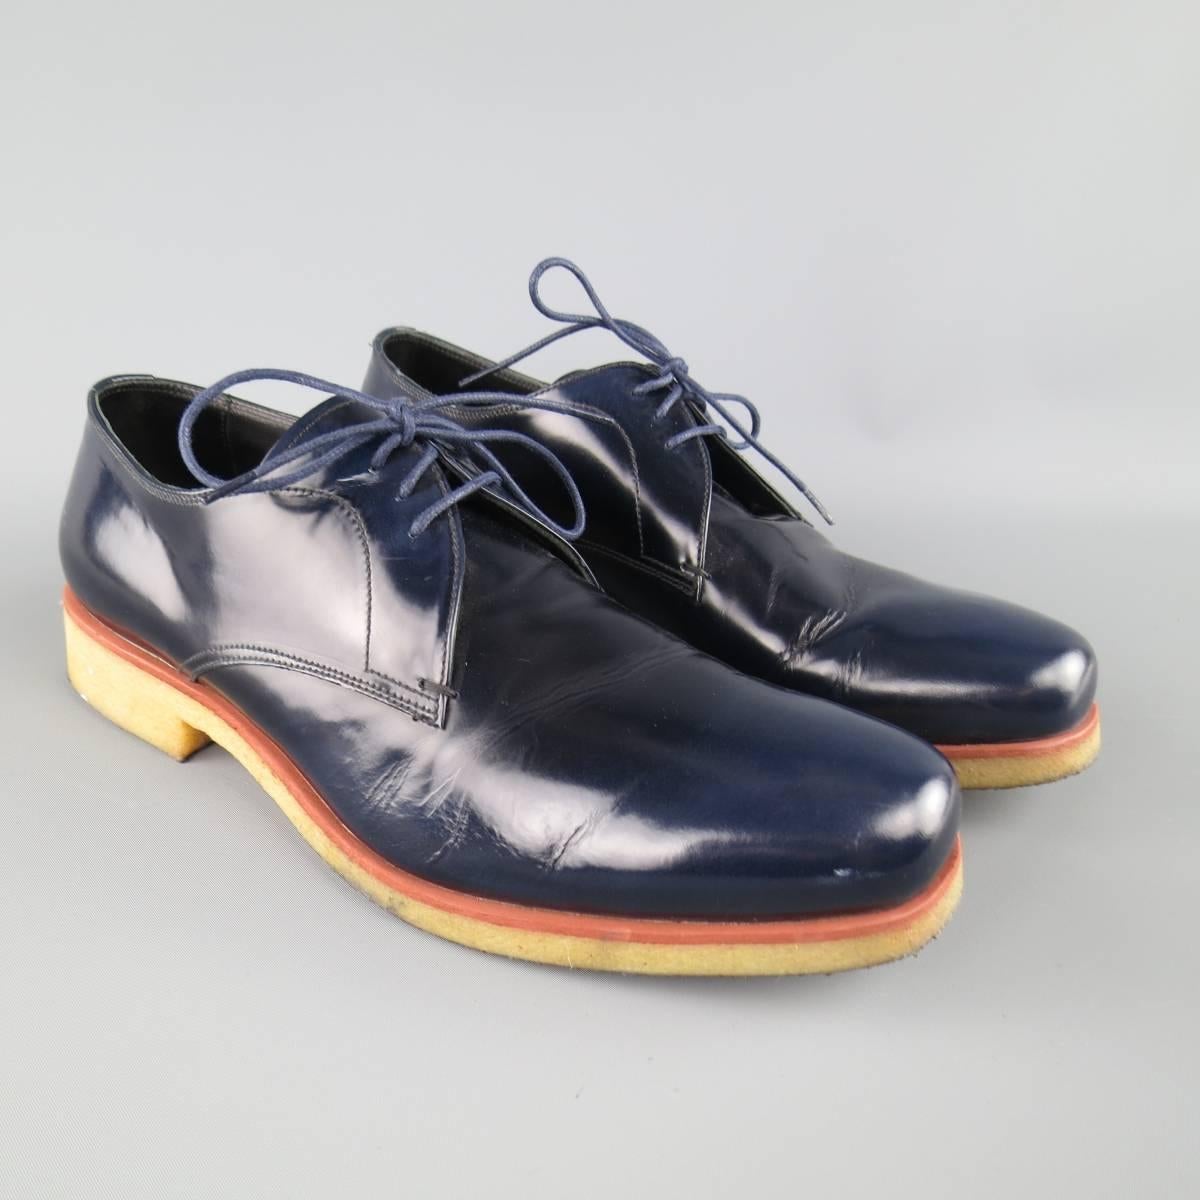 PRADA dress shoes in a navy blue polished leather with a thick beige crepe sole. Made in Italy.
 
Fair Pre-Owned Condition.
Marked: UK 10.5
 
Outsole: 12.5 x 4 in.